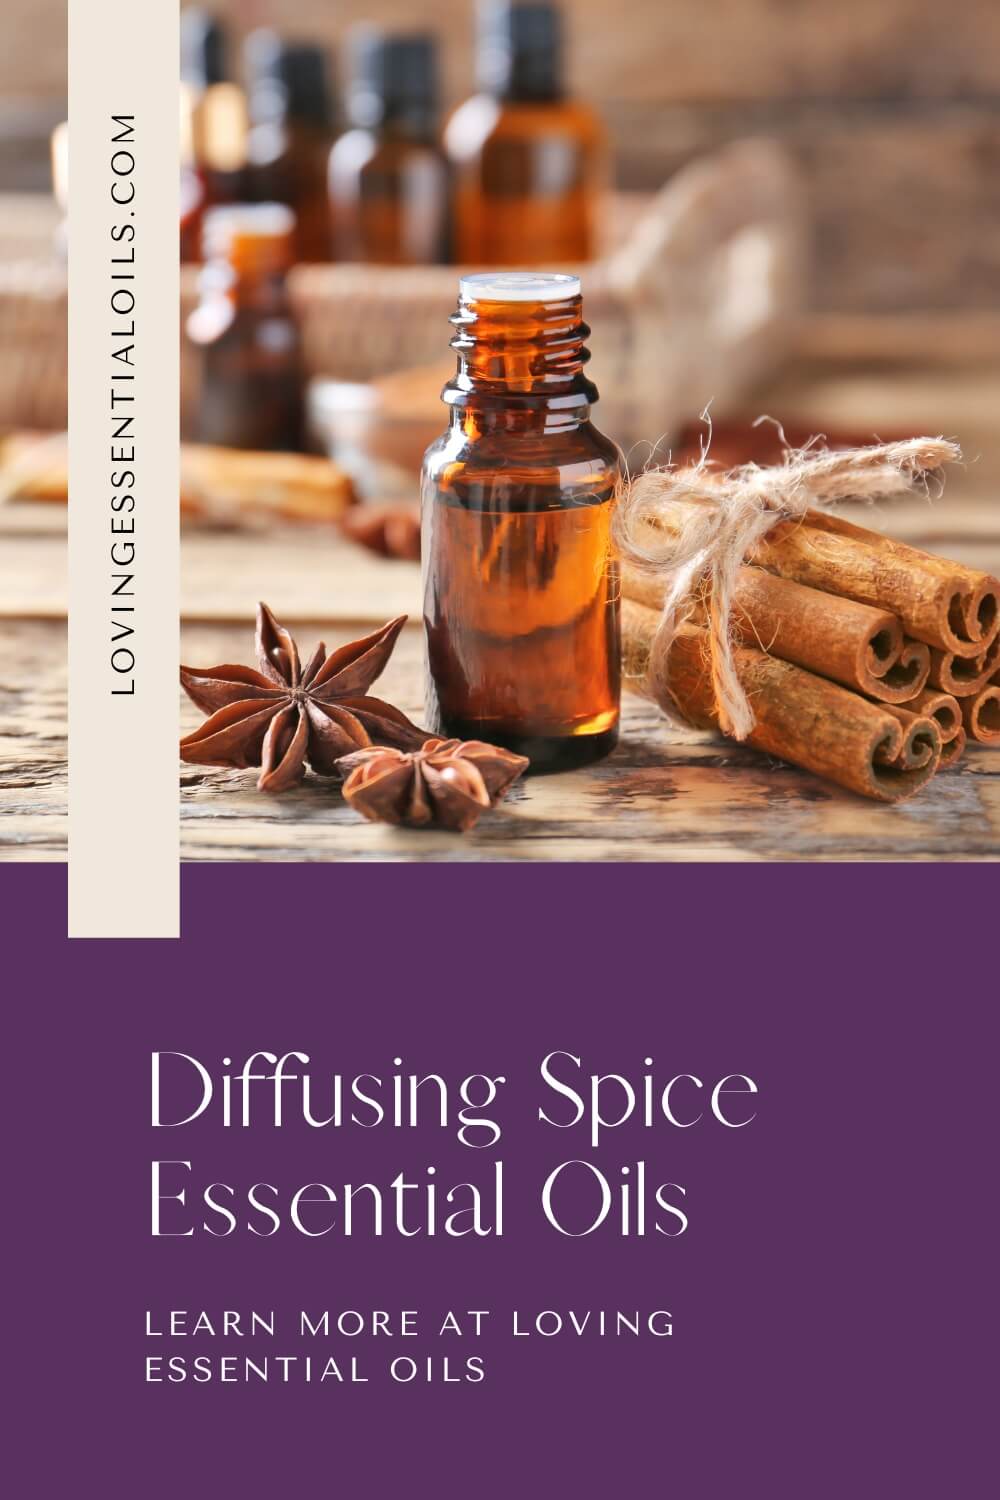 Diffusing Spice Essential Oils by Loving Essential Oils